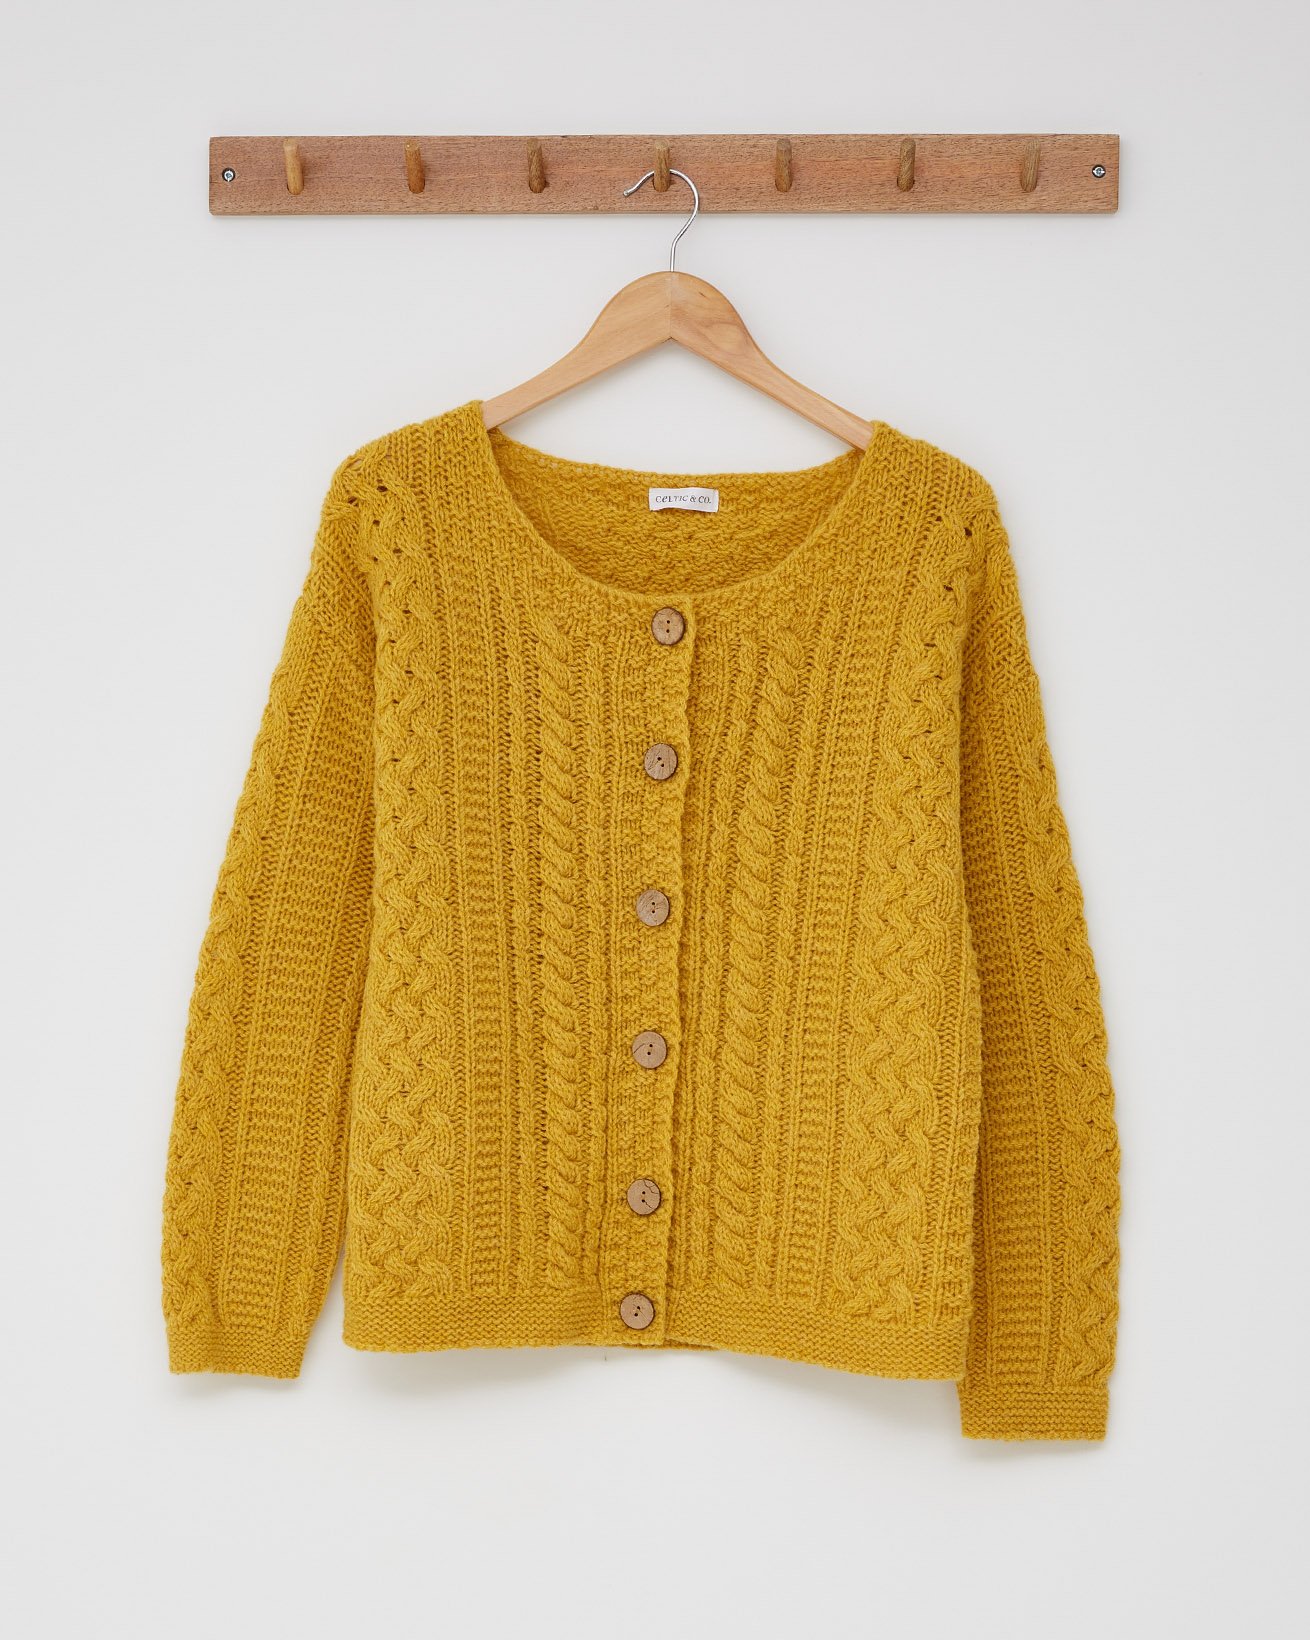 2441 shetland cable cardigan - size small - gorse.jpg